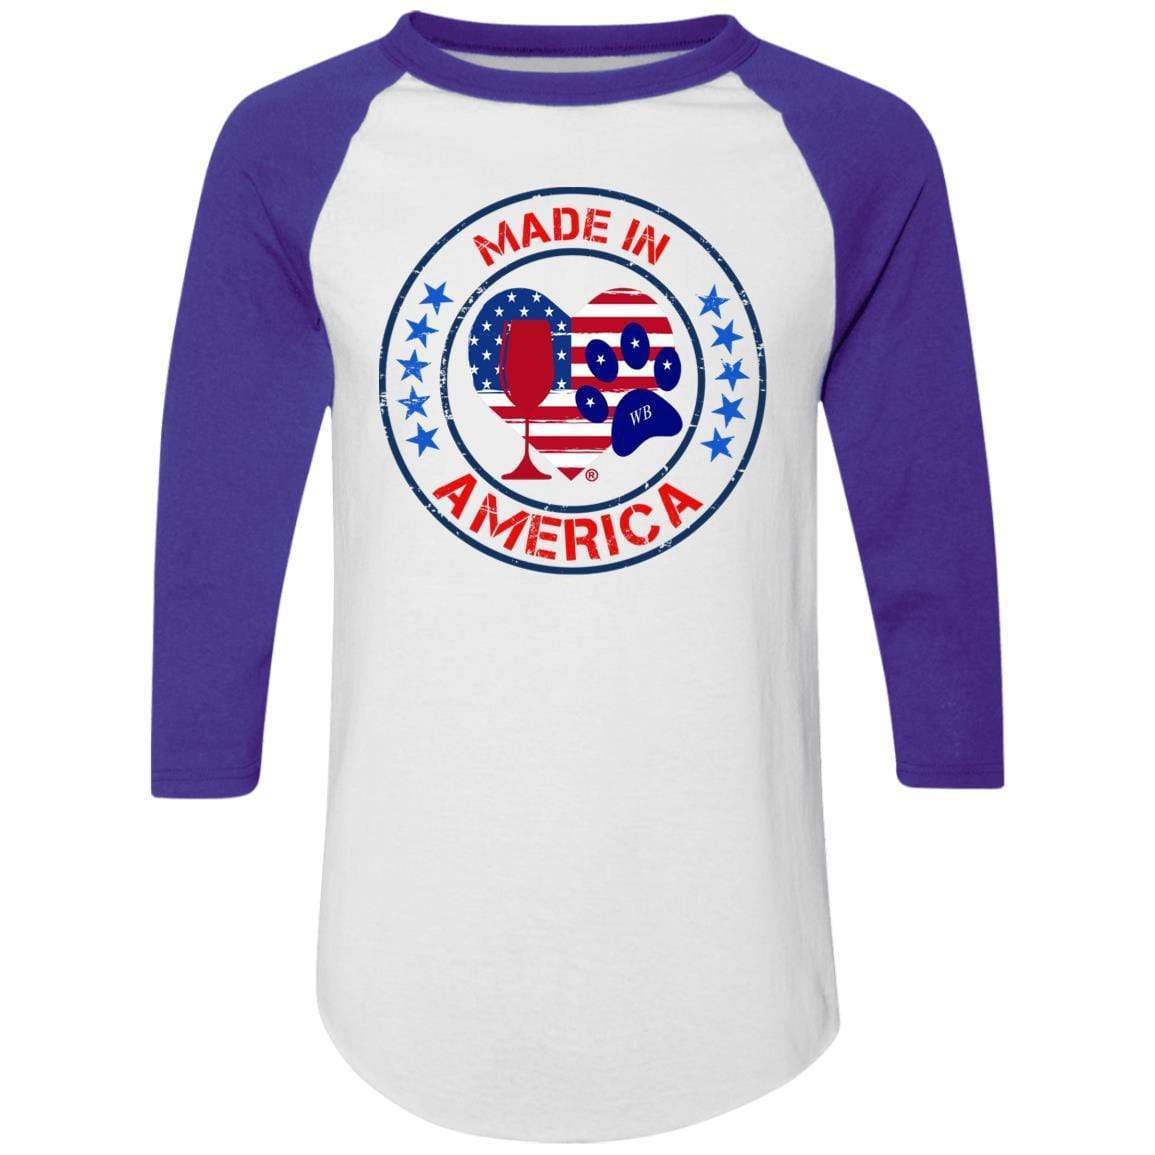 T-Shirts White/Purple / S Winey Bitches Co "Made In America" Colorblock Raglan Jersey WineyBitchesCo